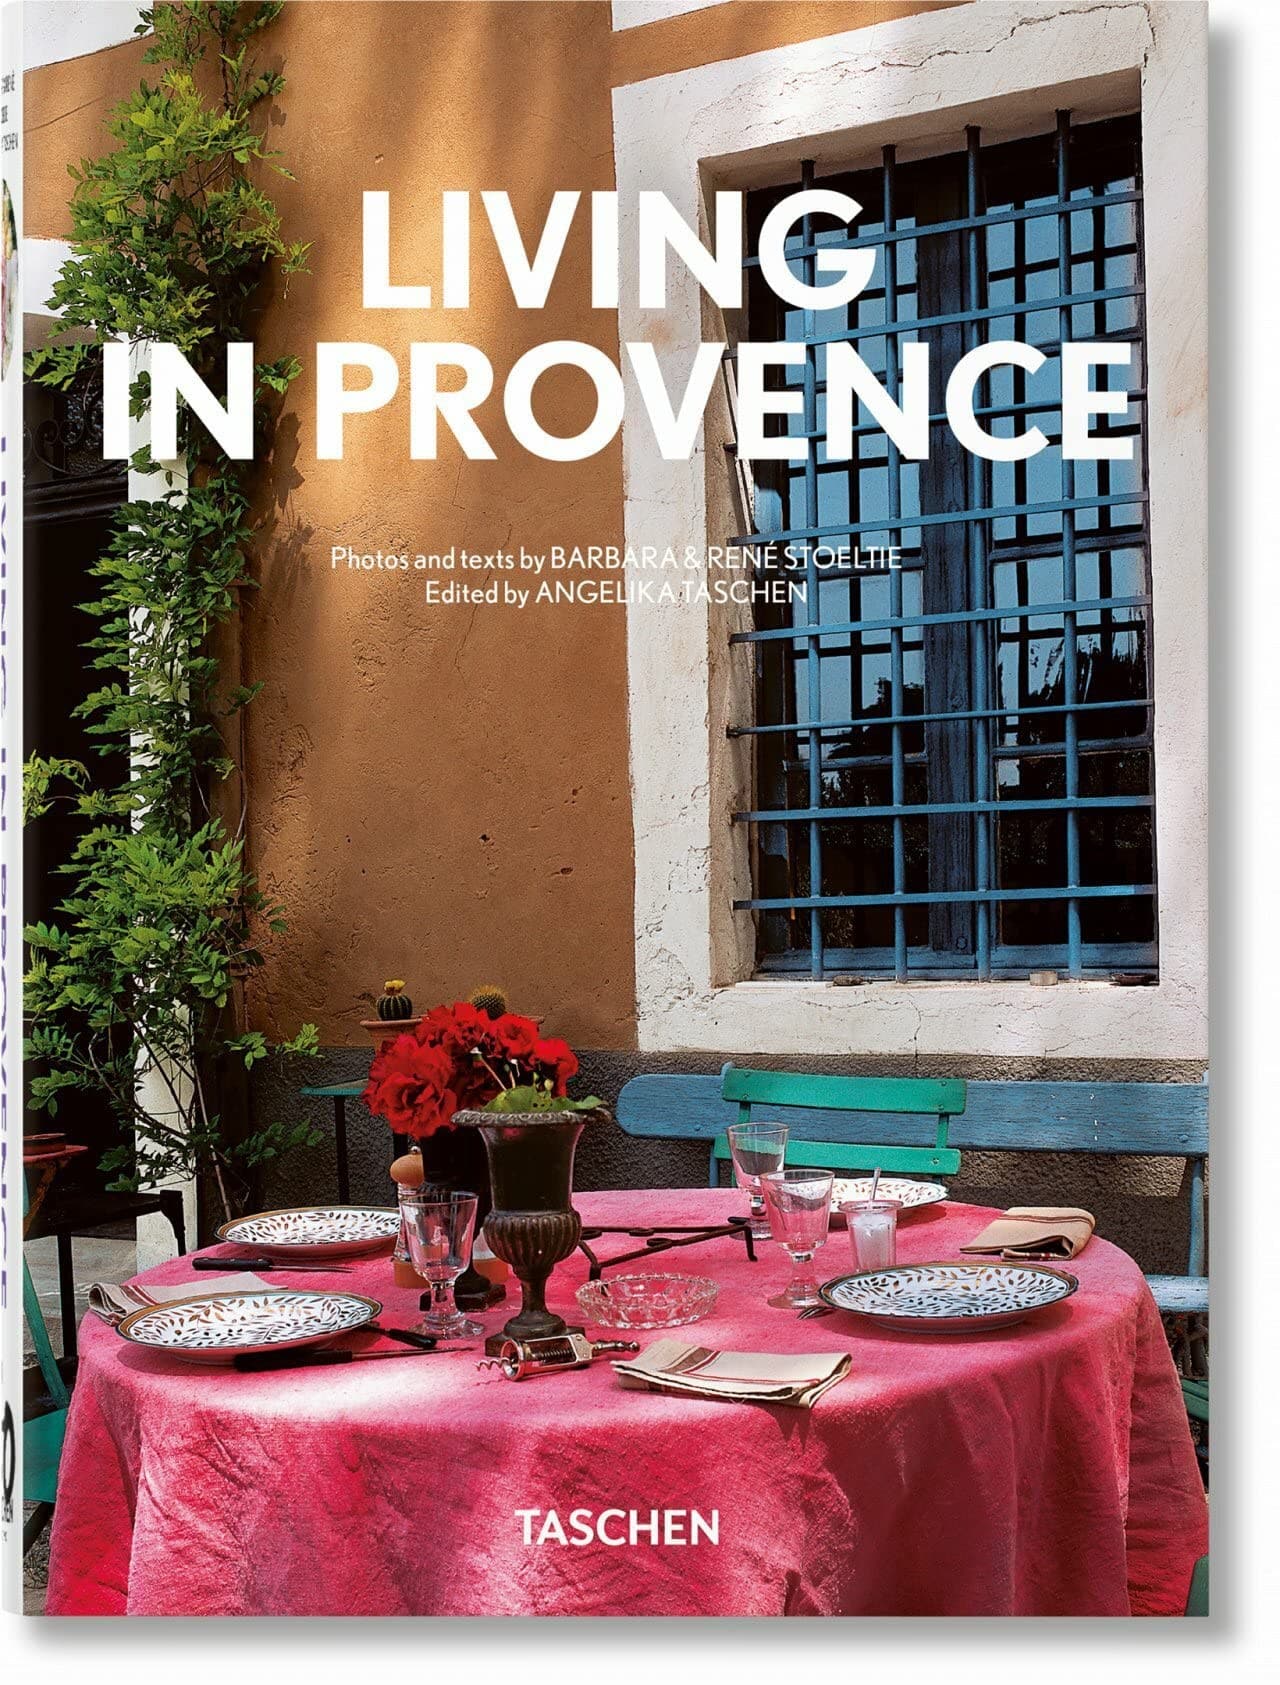 14611-living-in-provence-40th-ed-814zimktrel